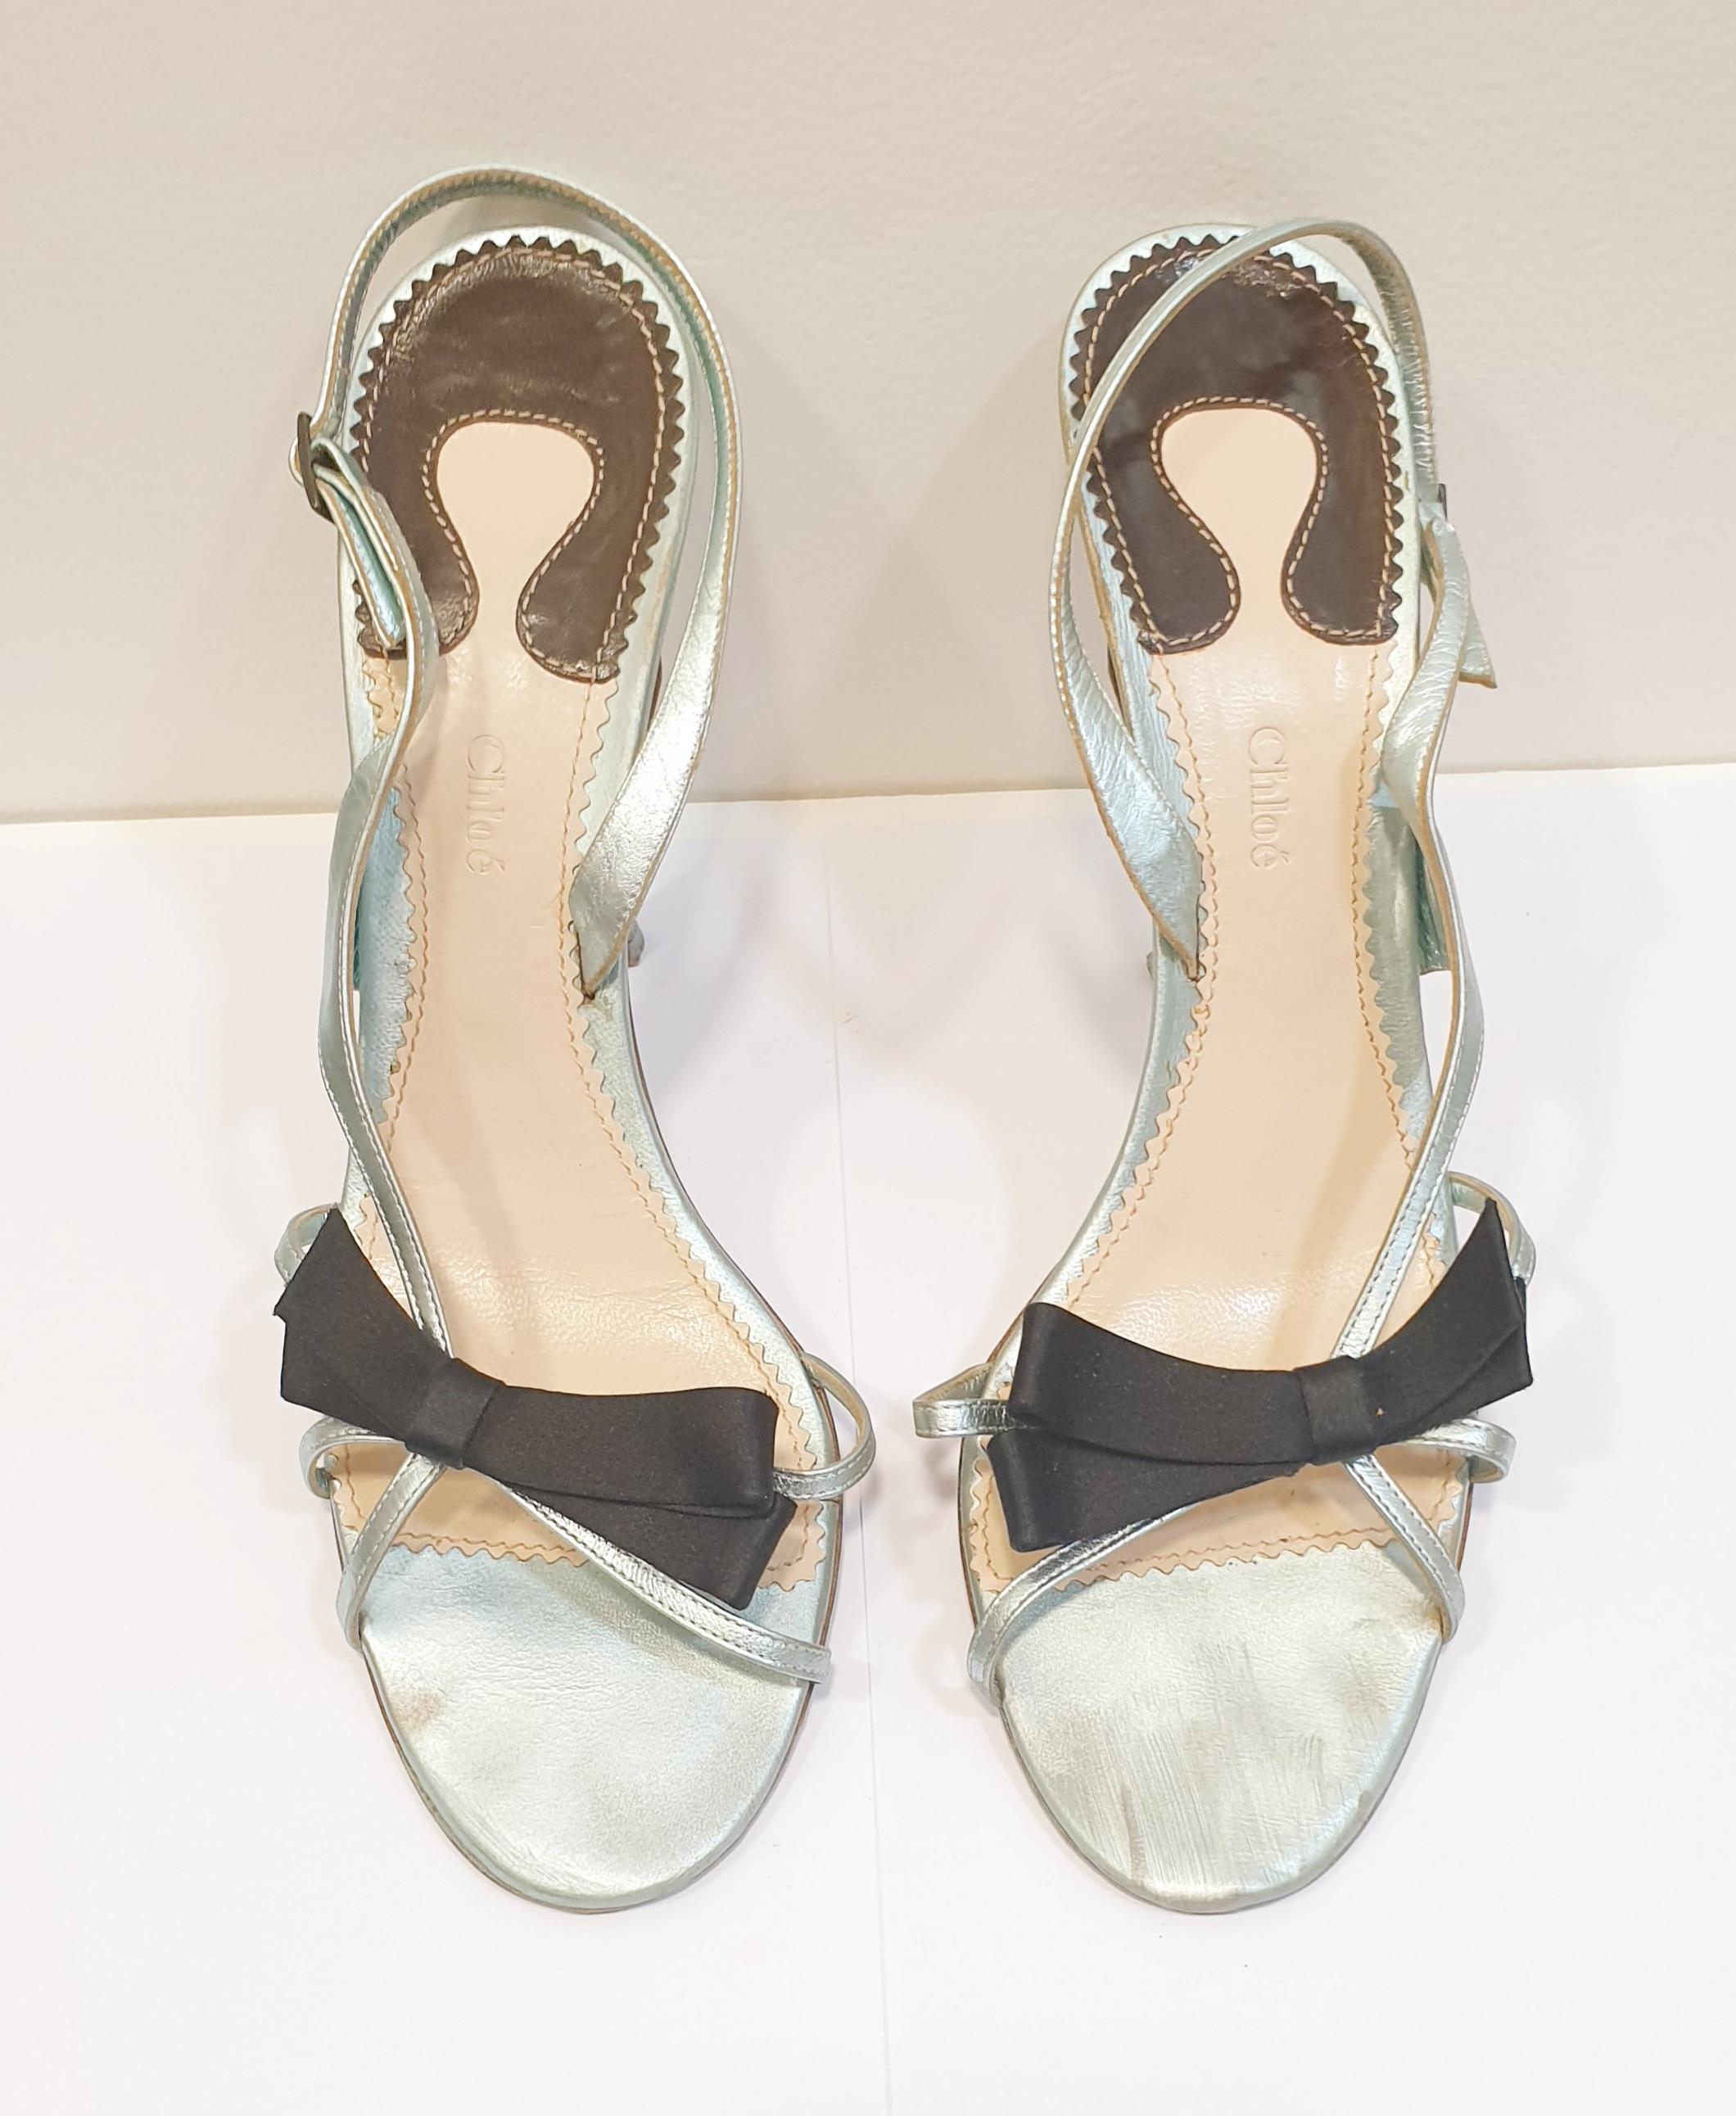 Light Metallic blue heeled sandals with Black silk lace  buckle fastening
These ultra feminine night sandal is perfect for striking an elegant pose. 
Very good previously owned condition with some light wear to leather and lined interior. 
Overall